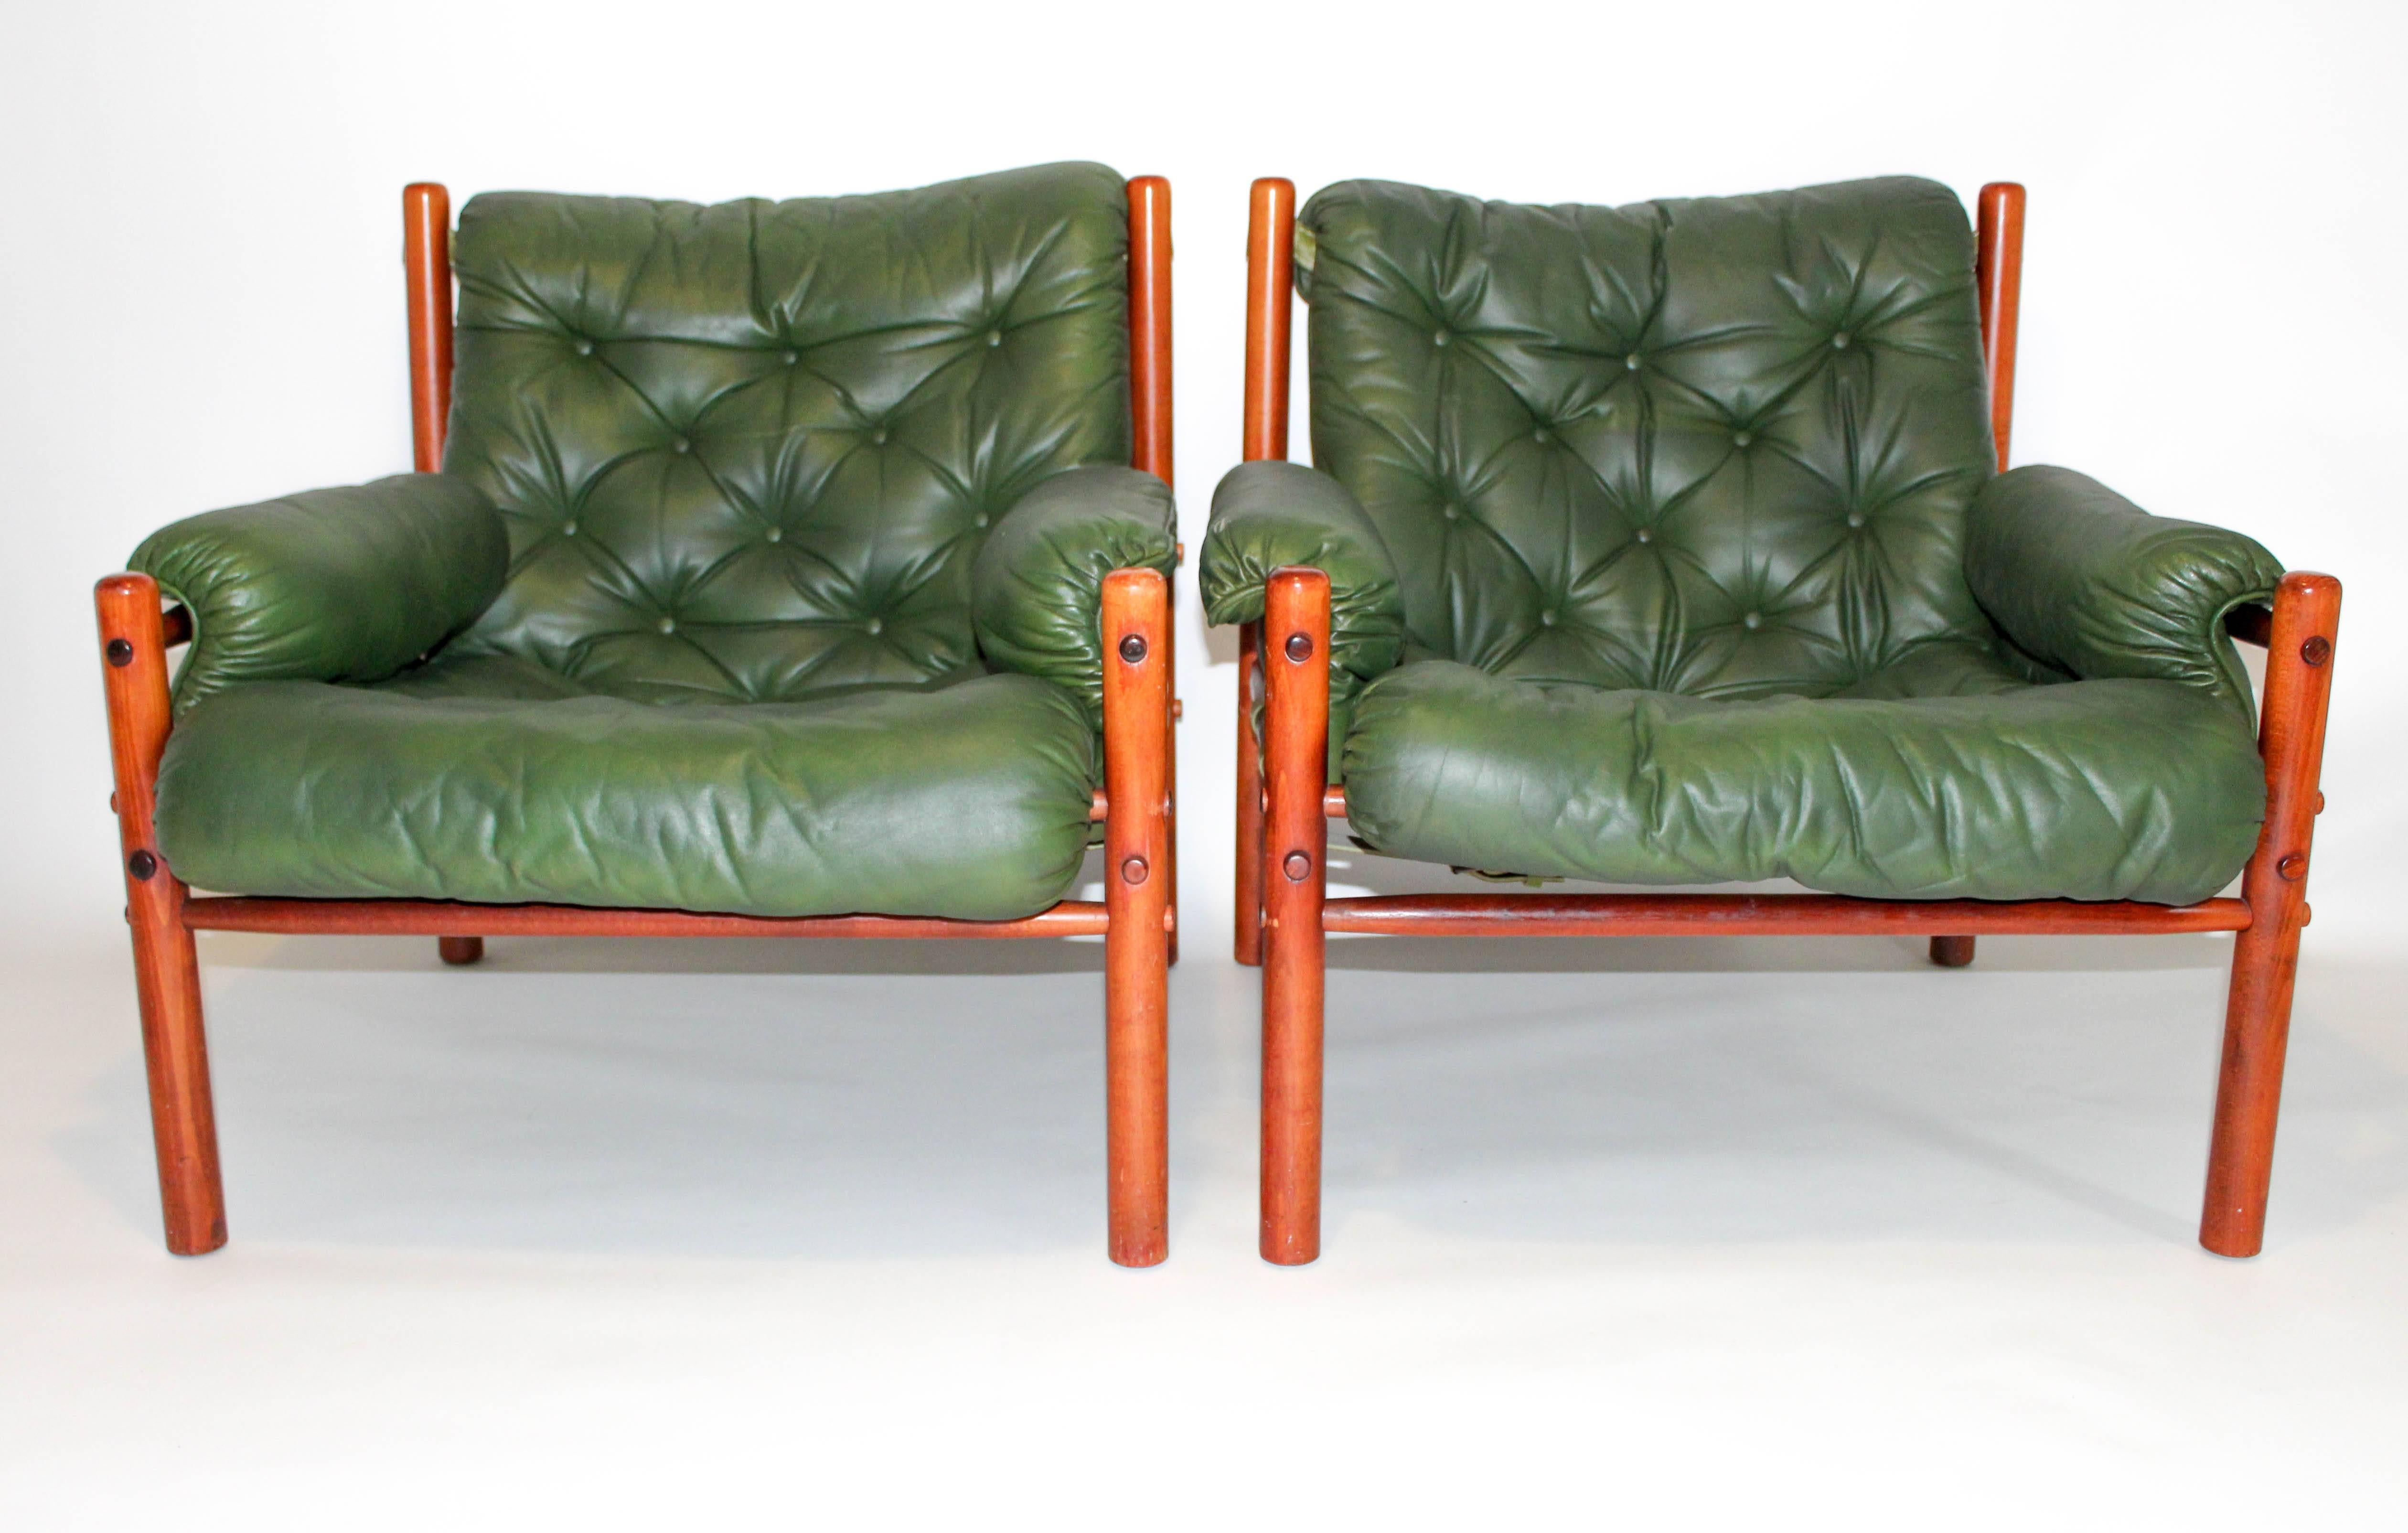 A pair of Arne Norell chairs in green leather, produced by Norell AB. These chairs are in very good vintage condition with signs of usage consistent with age. This is a rare model from this very popular Swedish designer that combines great design